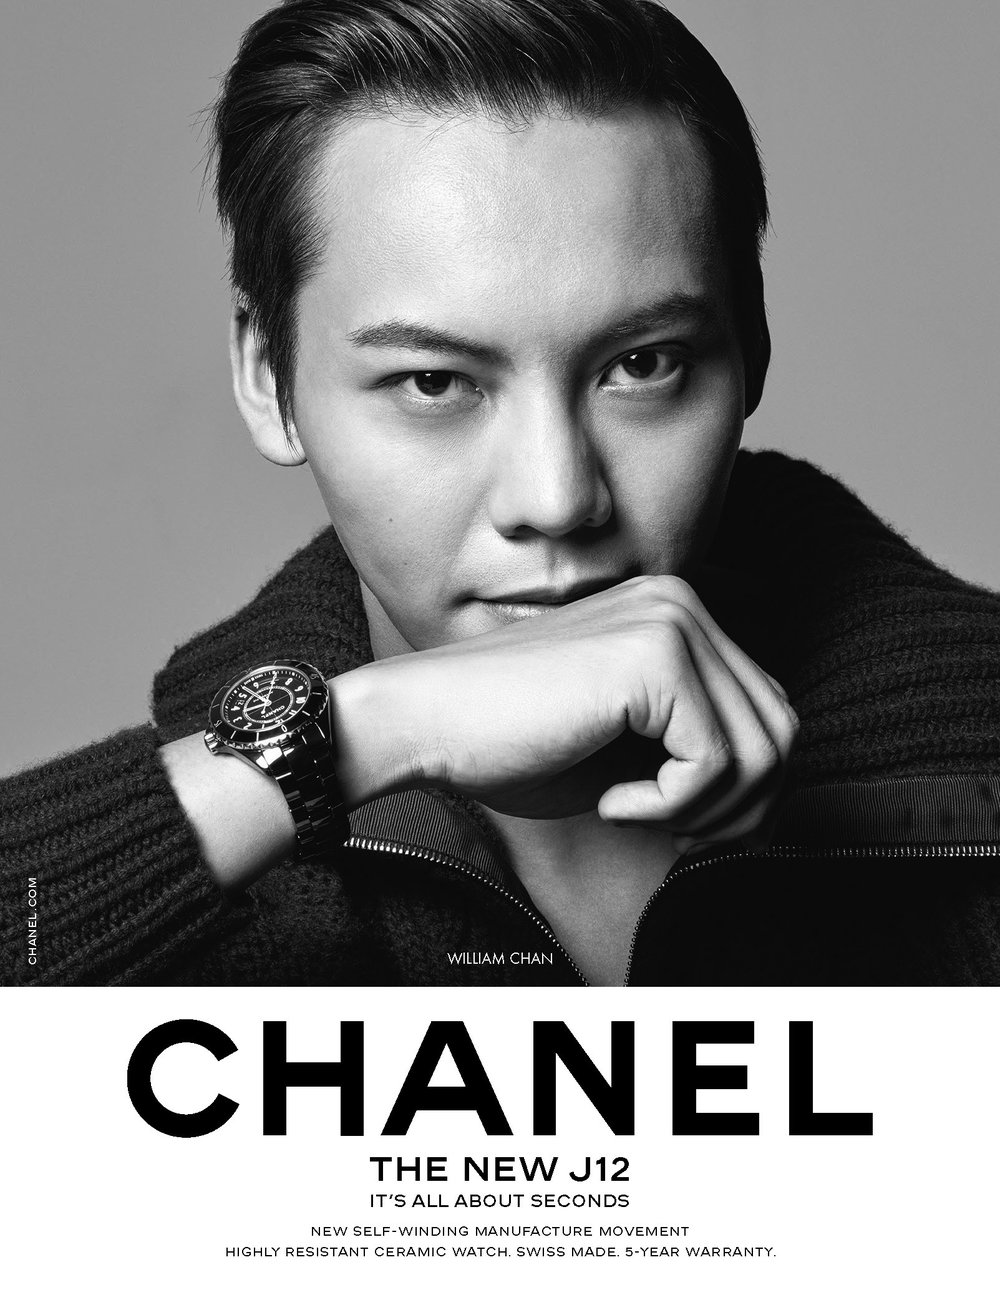 William Chan Fans on Twitter: "William Chan X Chanel J12 It's all  image